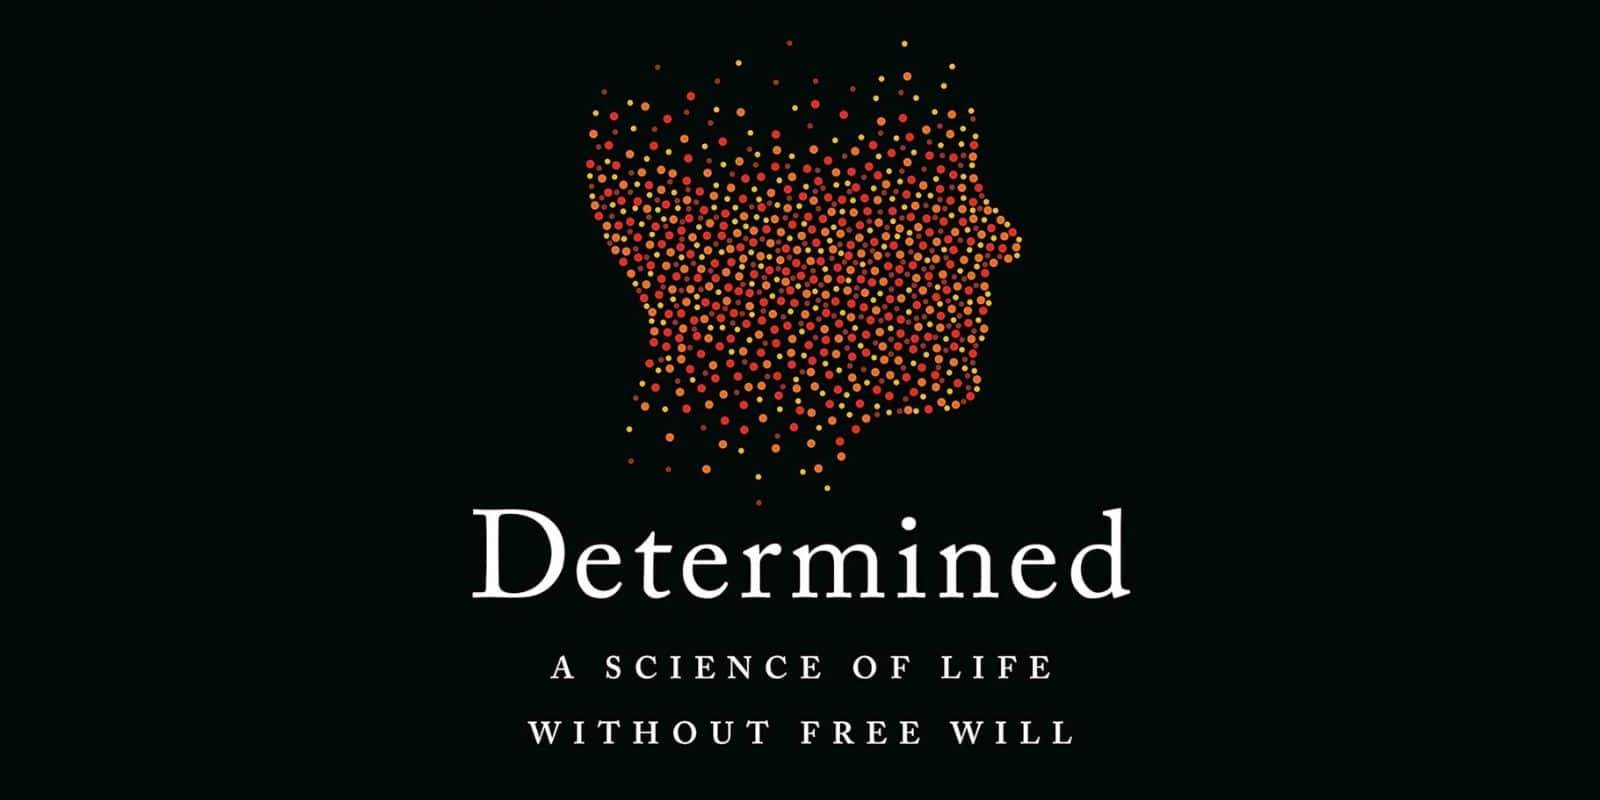 Determined book summary by Robert Sapolsky